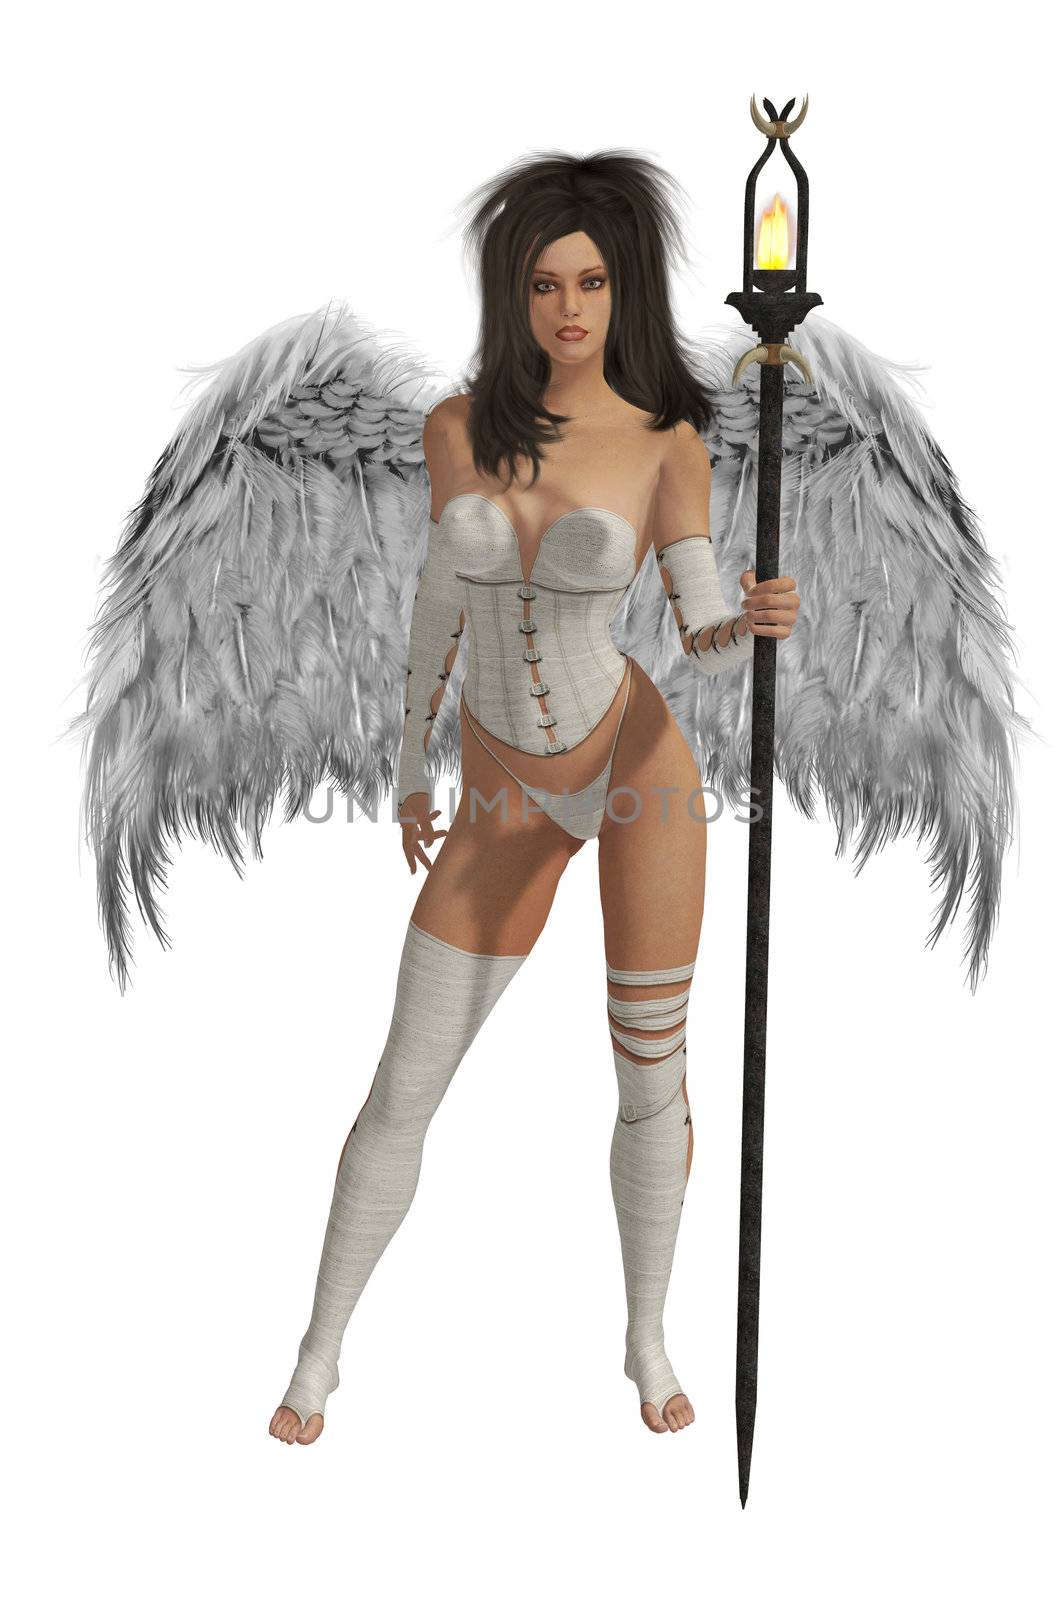 White Winged Angel With Dark Hair by kathygold